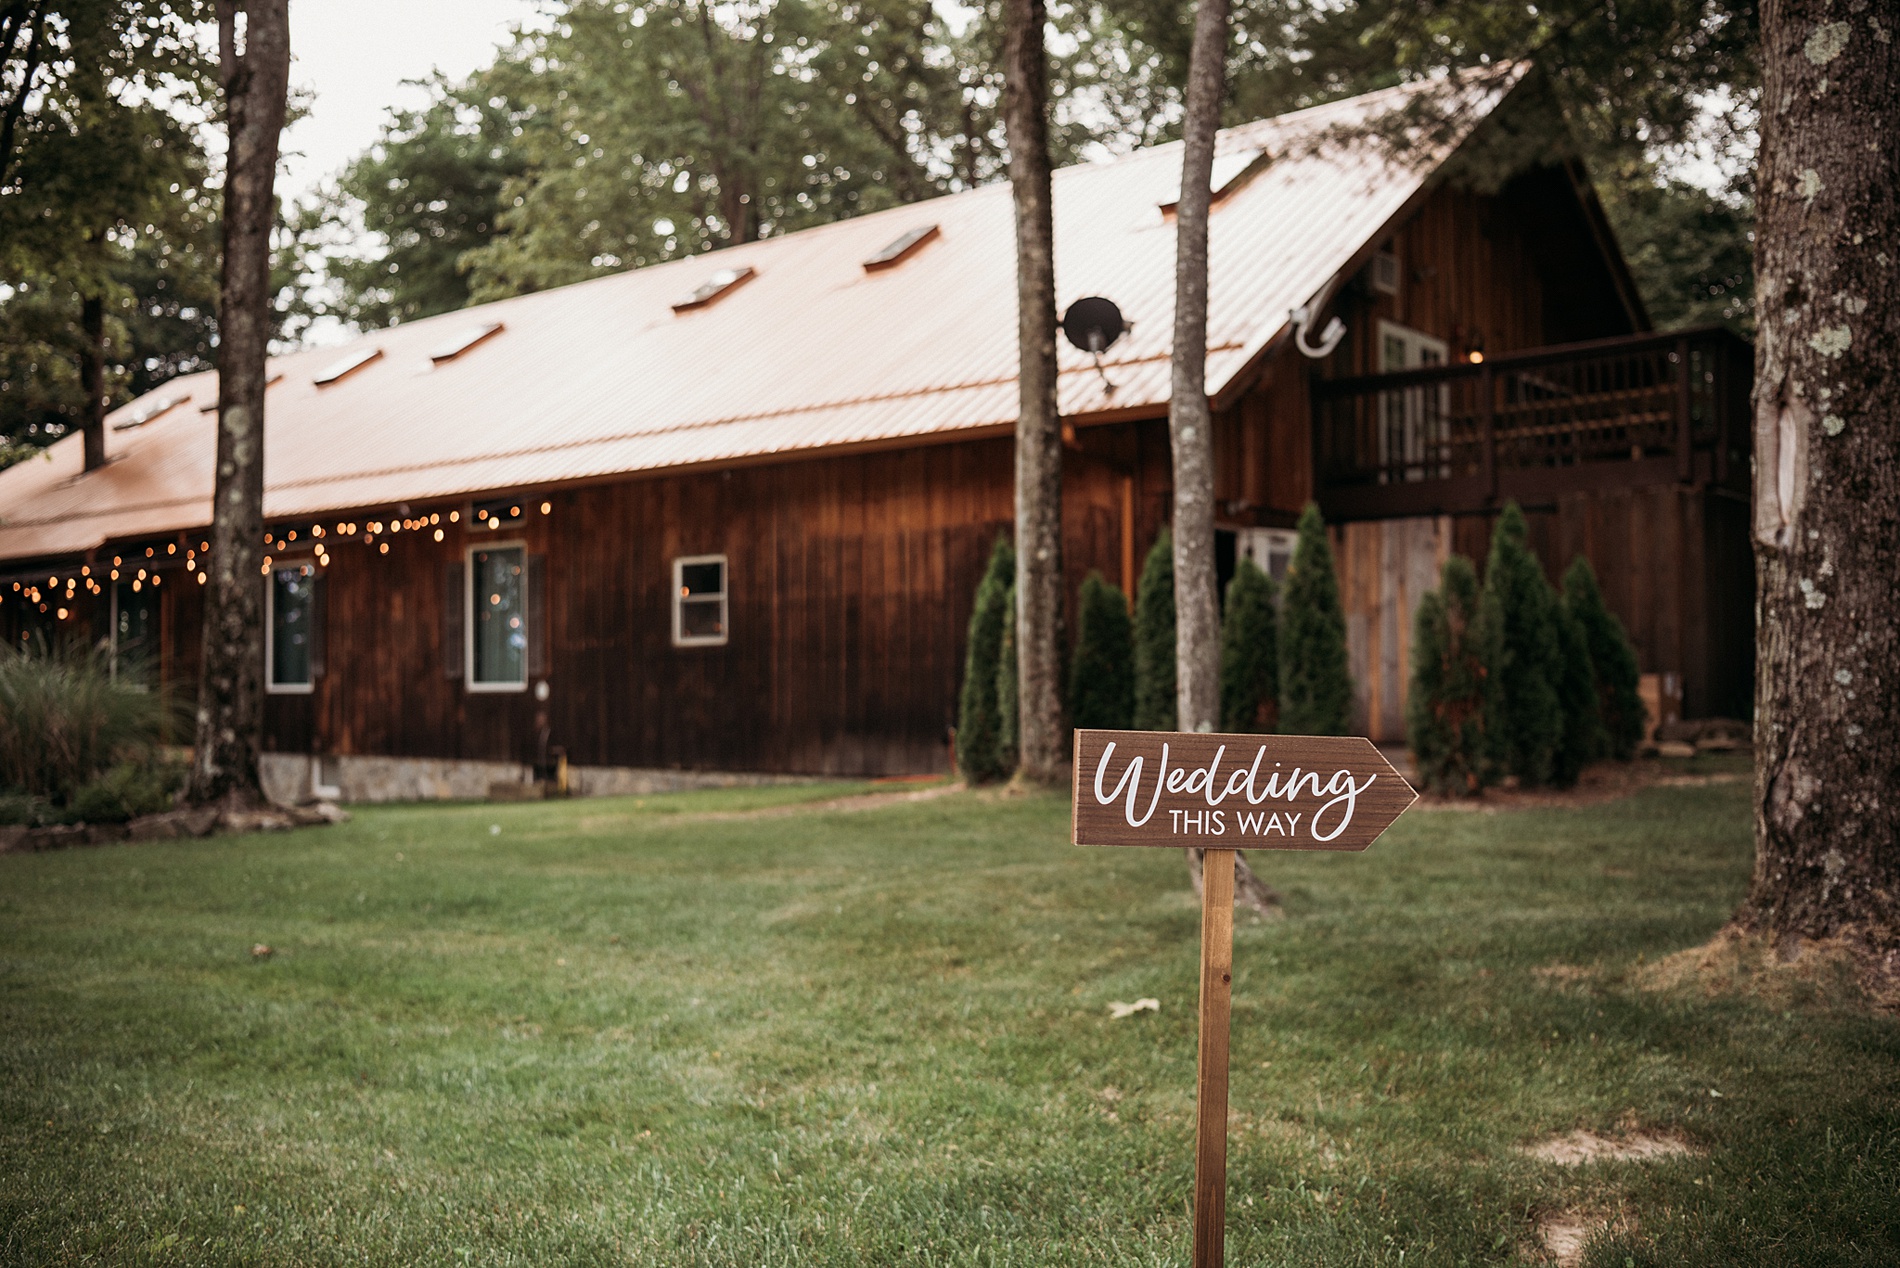 Top 14 Barn Wedding Venues in Ohio- The grand barn at the Mohicans